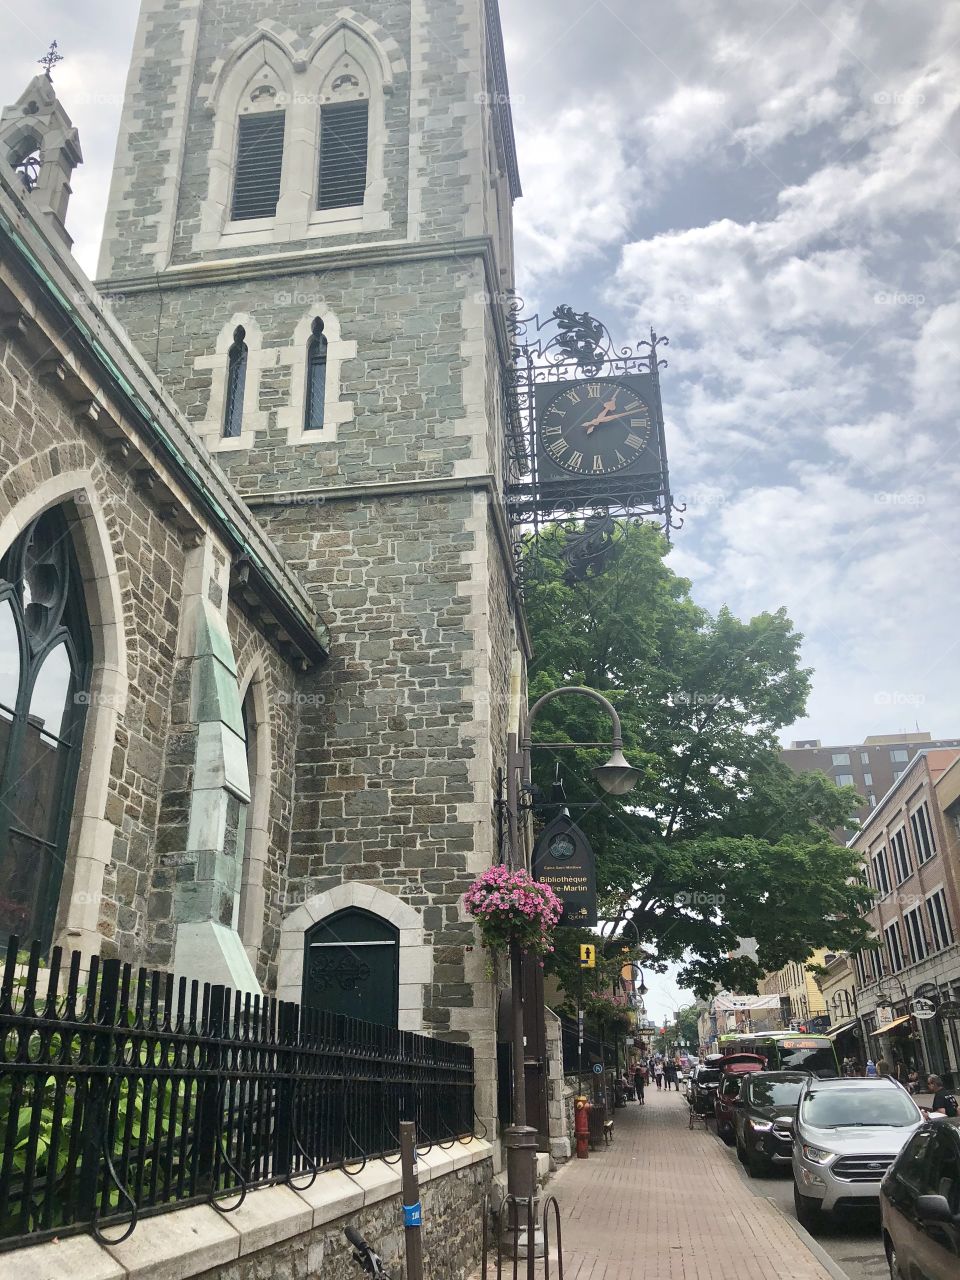 Eglise Saint Matthew stone church, french colonial architecture on the streets of Quebec city. 